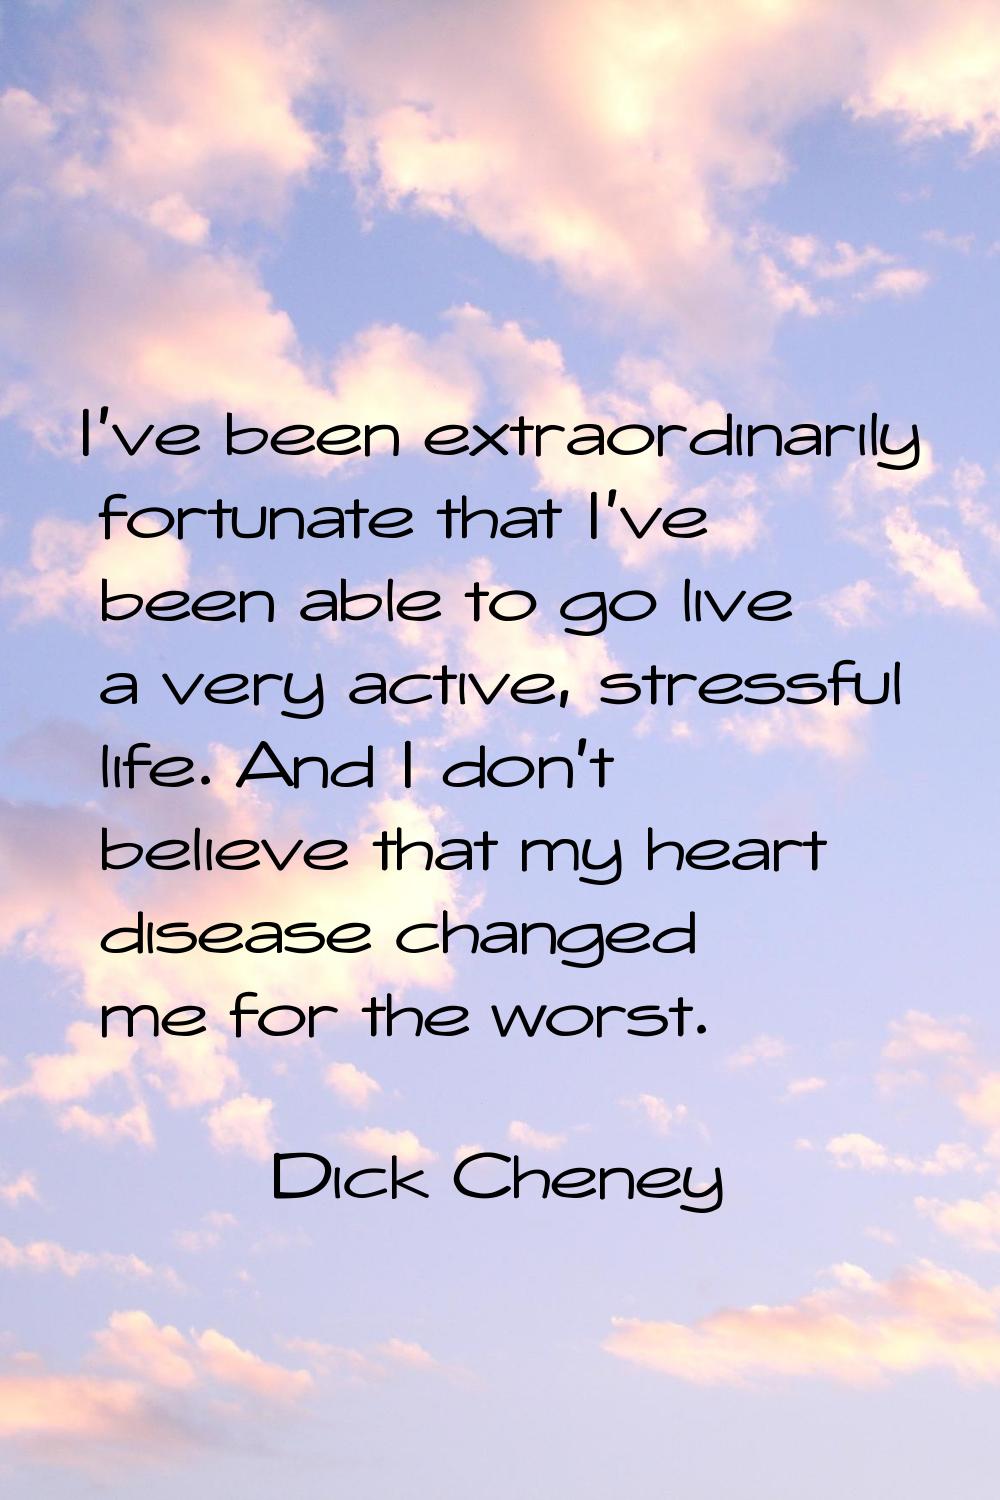 I've been extraordinarily fortunate that I've been able to go live a very active, stressful life. A